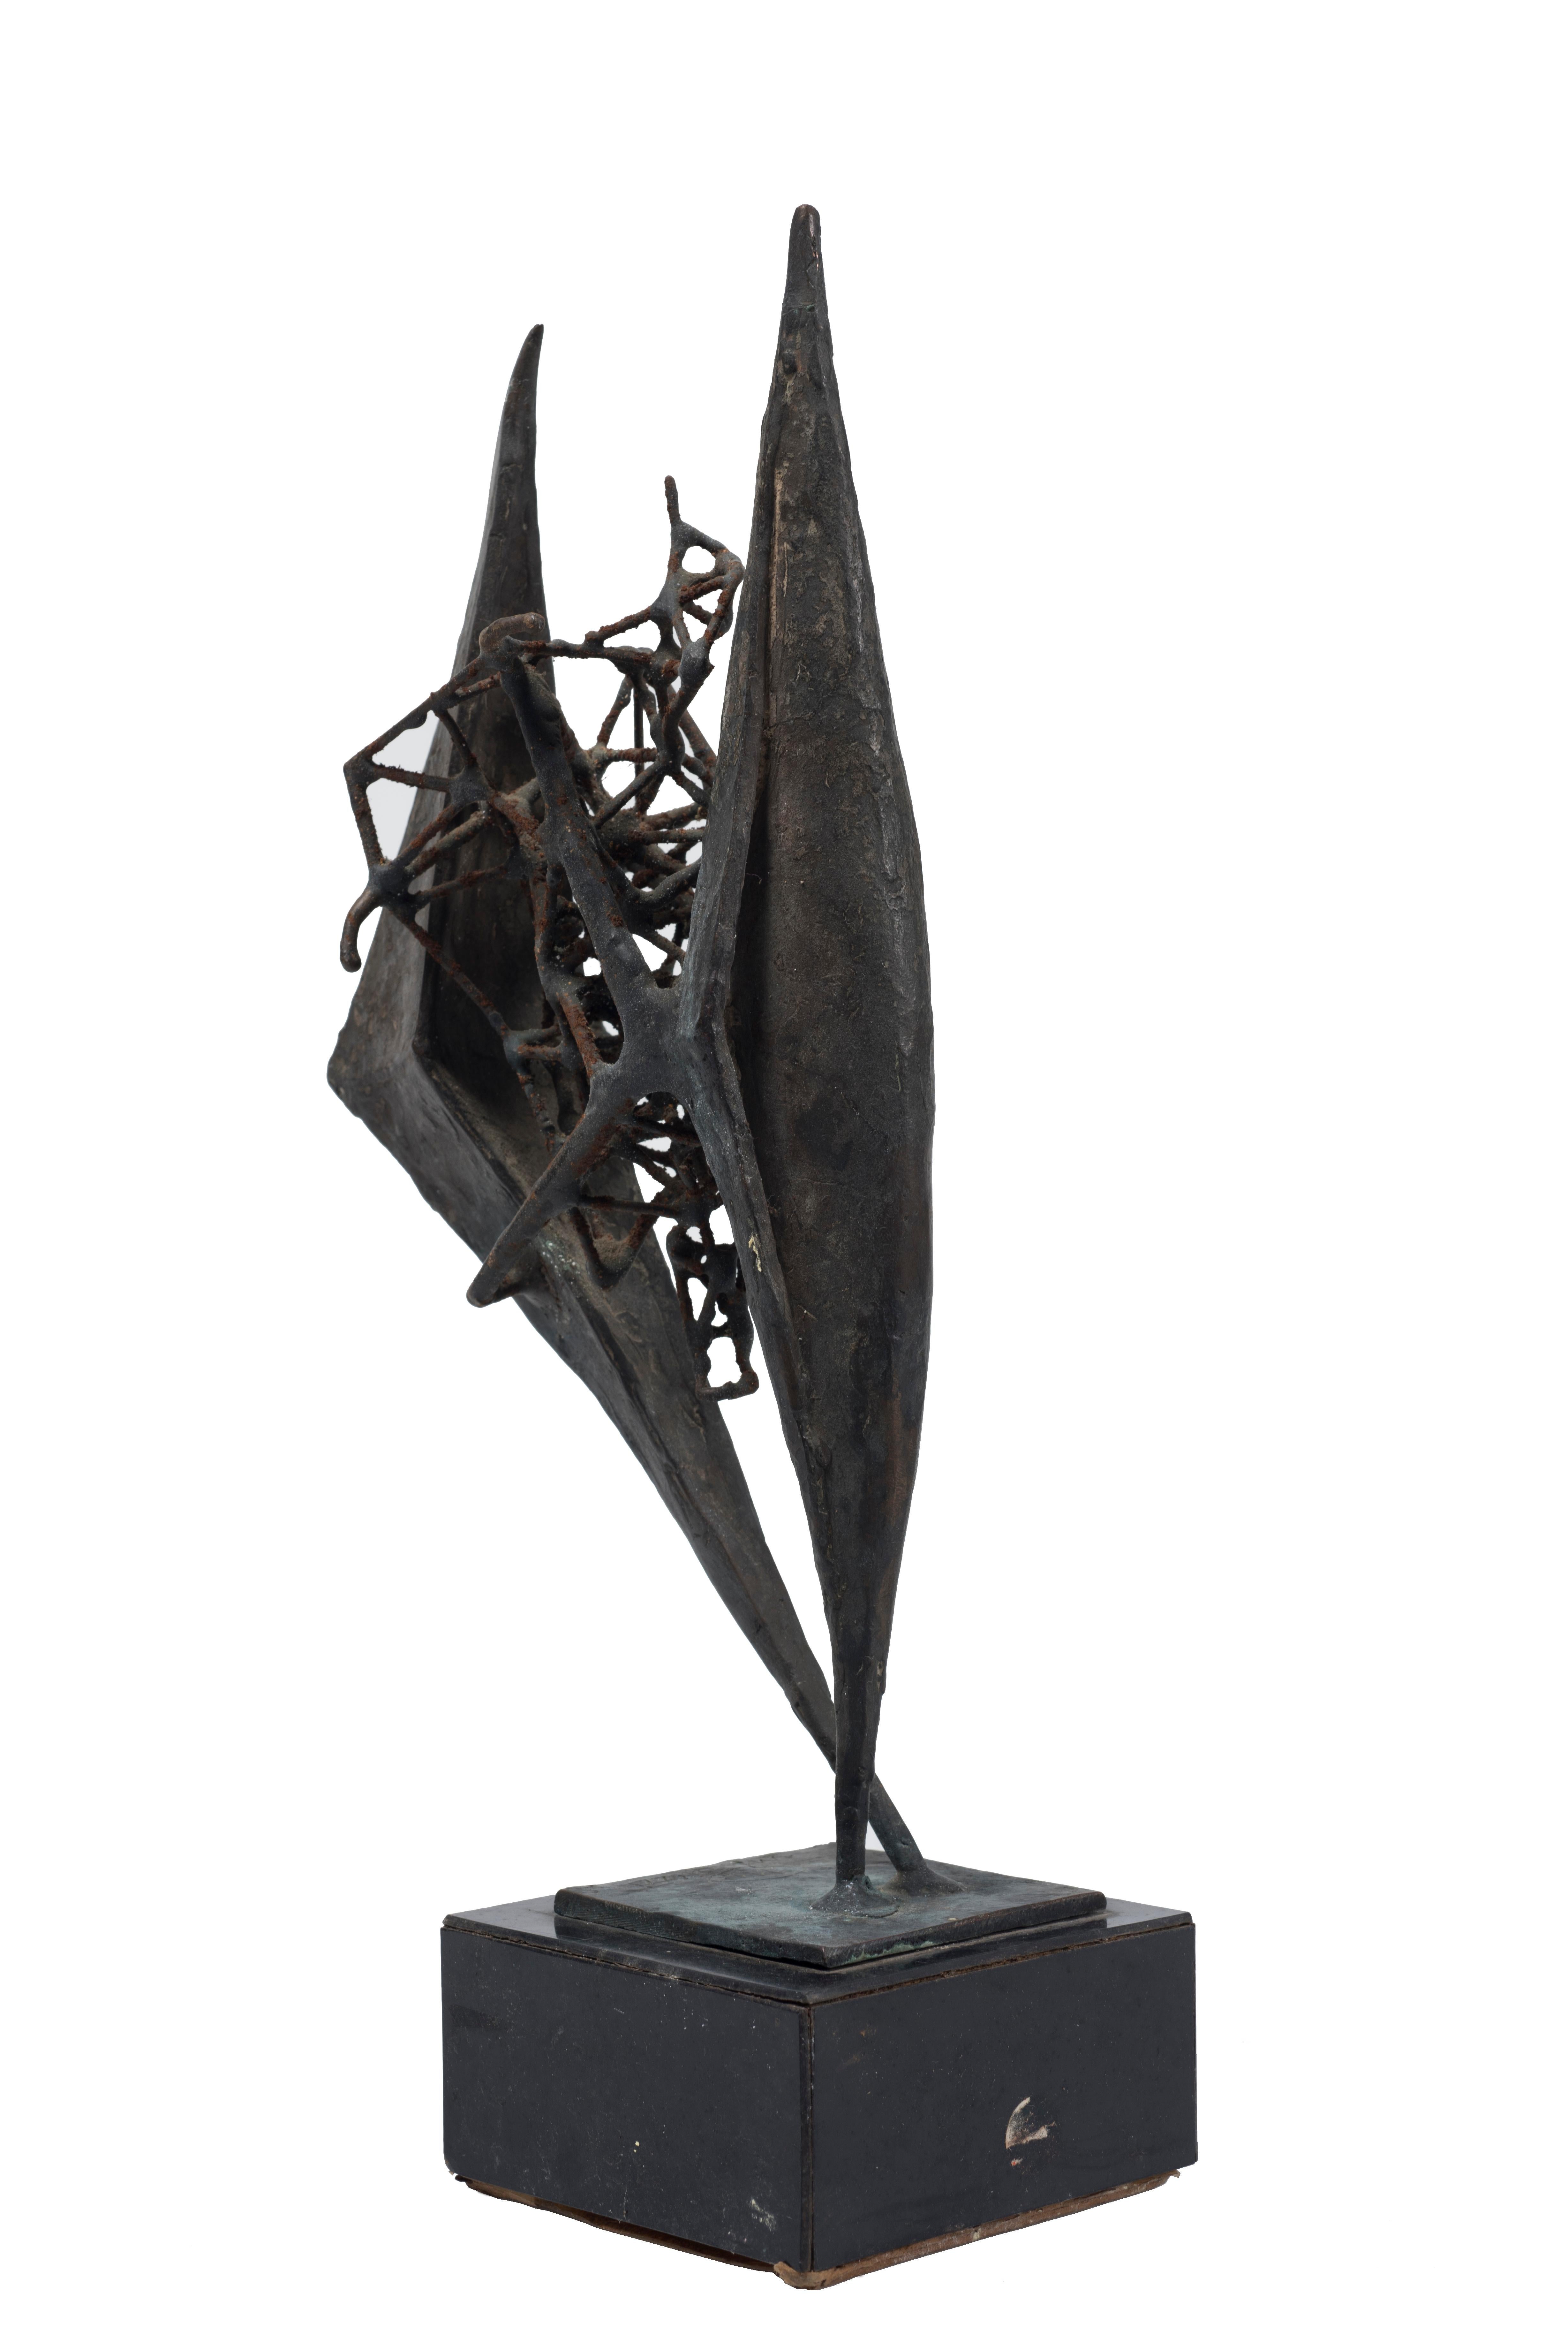 Lovers - Bronze Sculpture by Luciano Minguzzi - 1950s For Sale 2